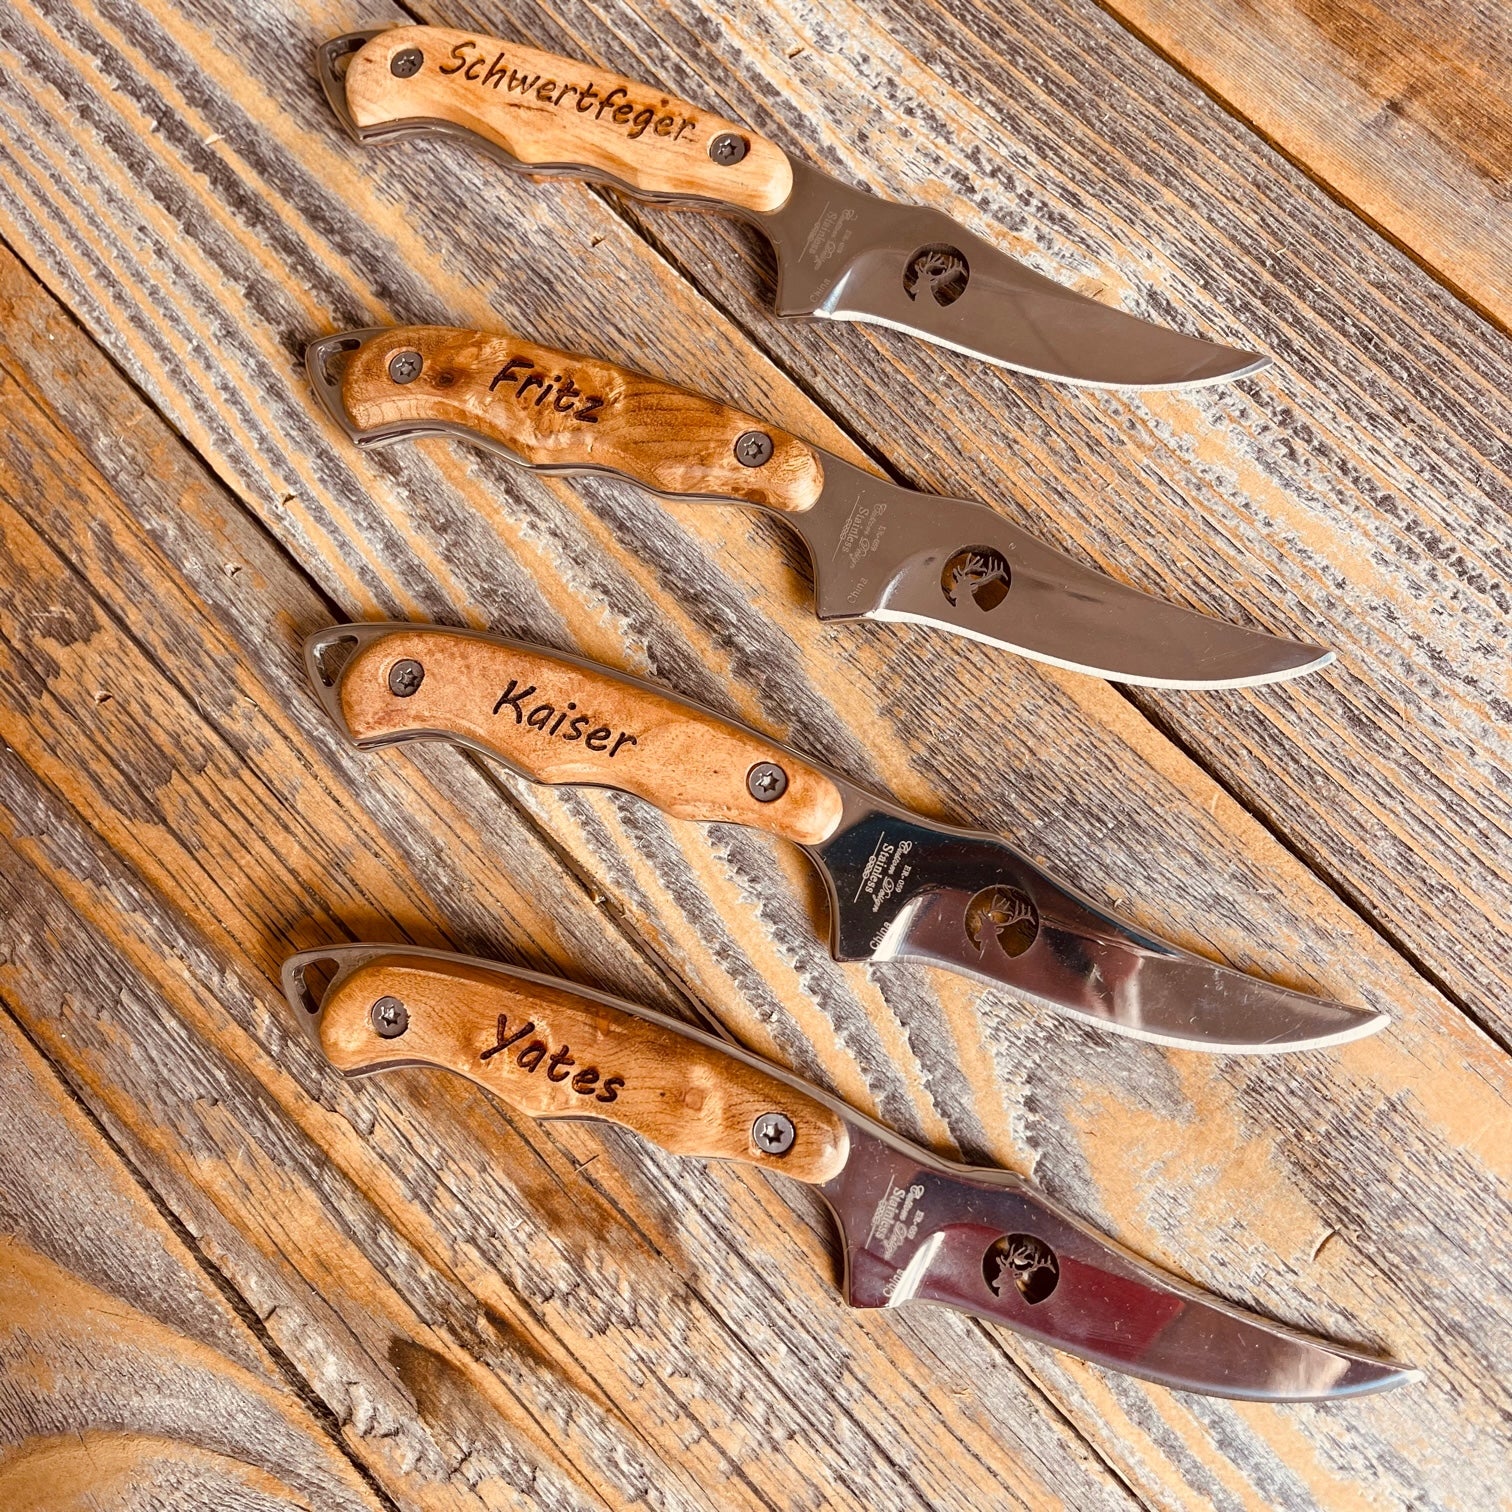 Steak Knife Set, Personalized Steak Knives, Wood Handle Flatware, Gifts for  Groomsmen, Personalized Wedding Gifts, Wedding Party Favors 